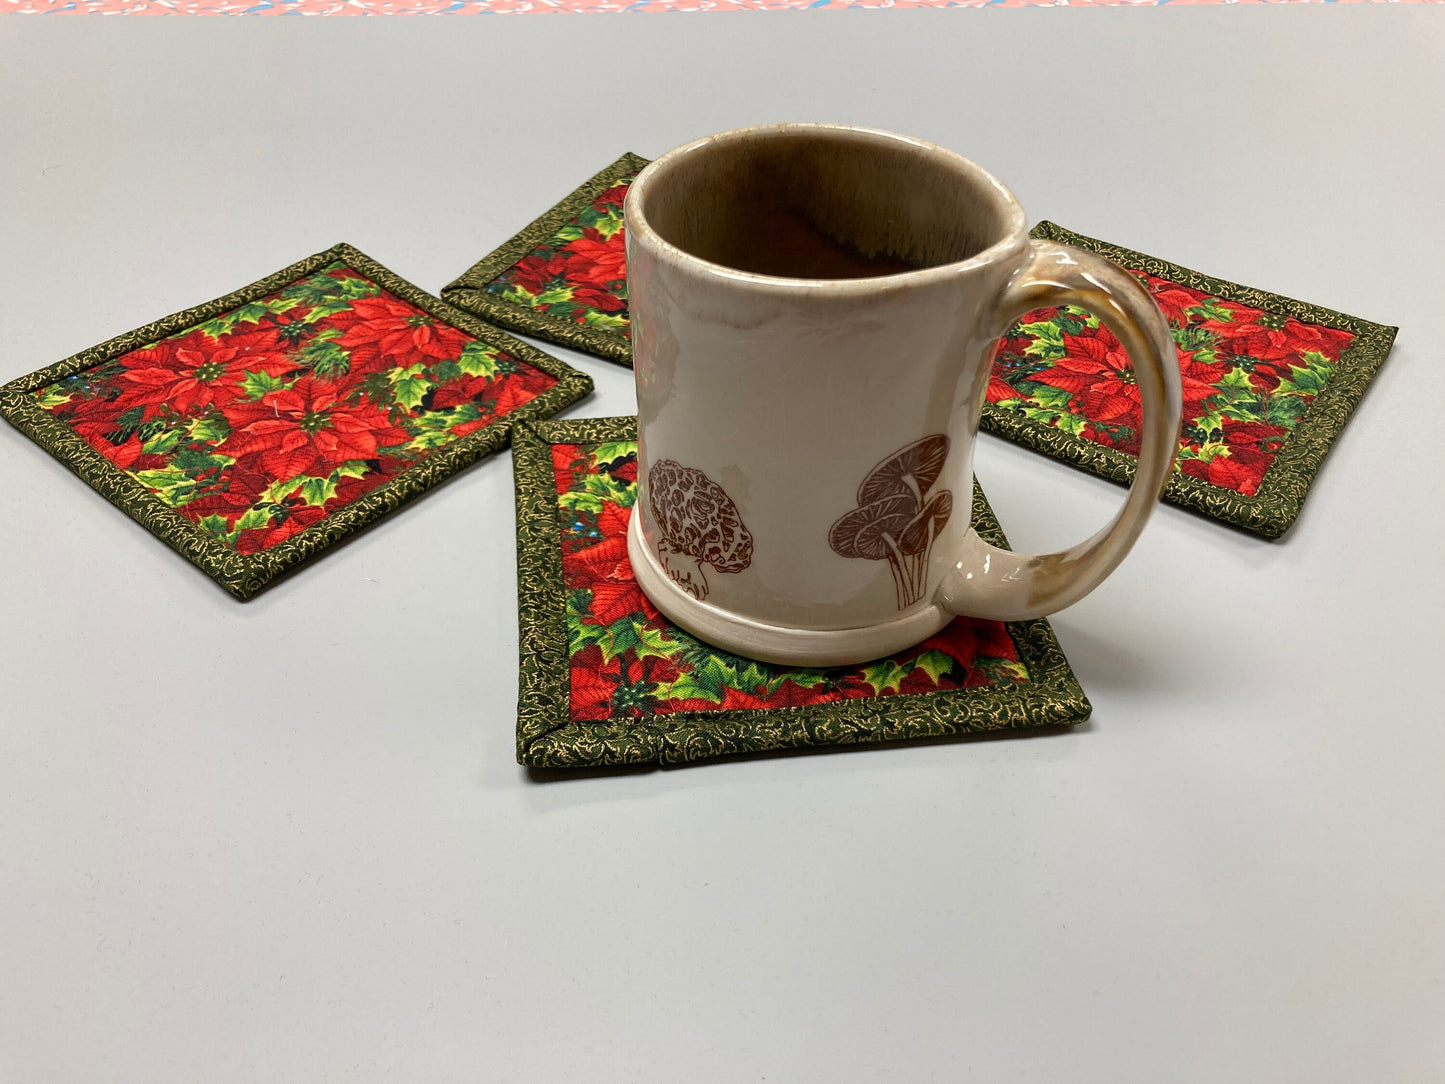 Christmas Fabric Coasters for Drinks, Red Poinsettias and Holly Blue Berries, Drink Mats, Hot Cold Washable, Reversible, 5x5" Winter Decor